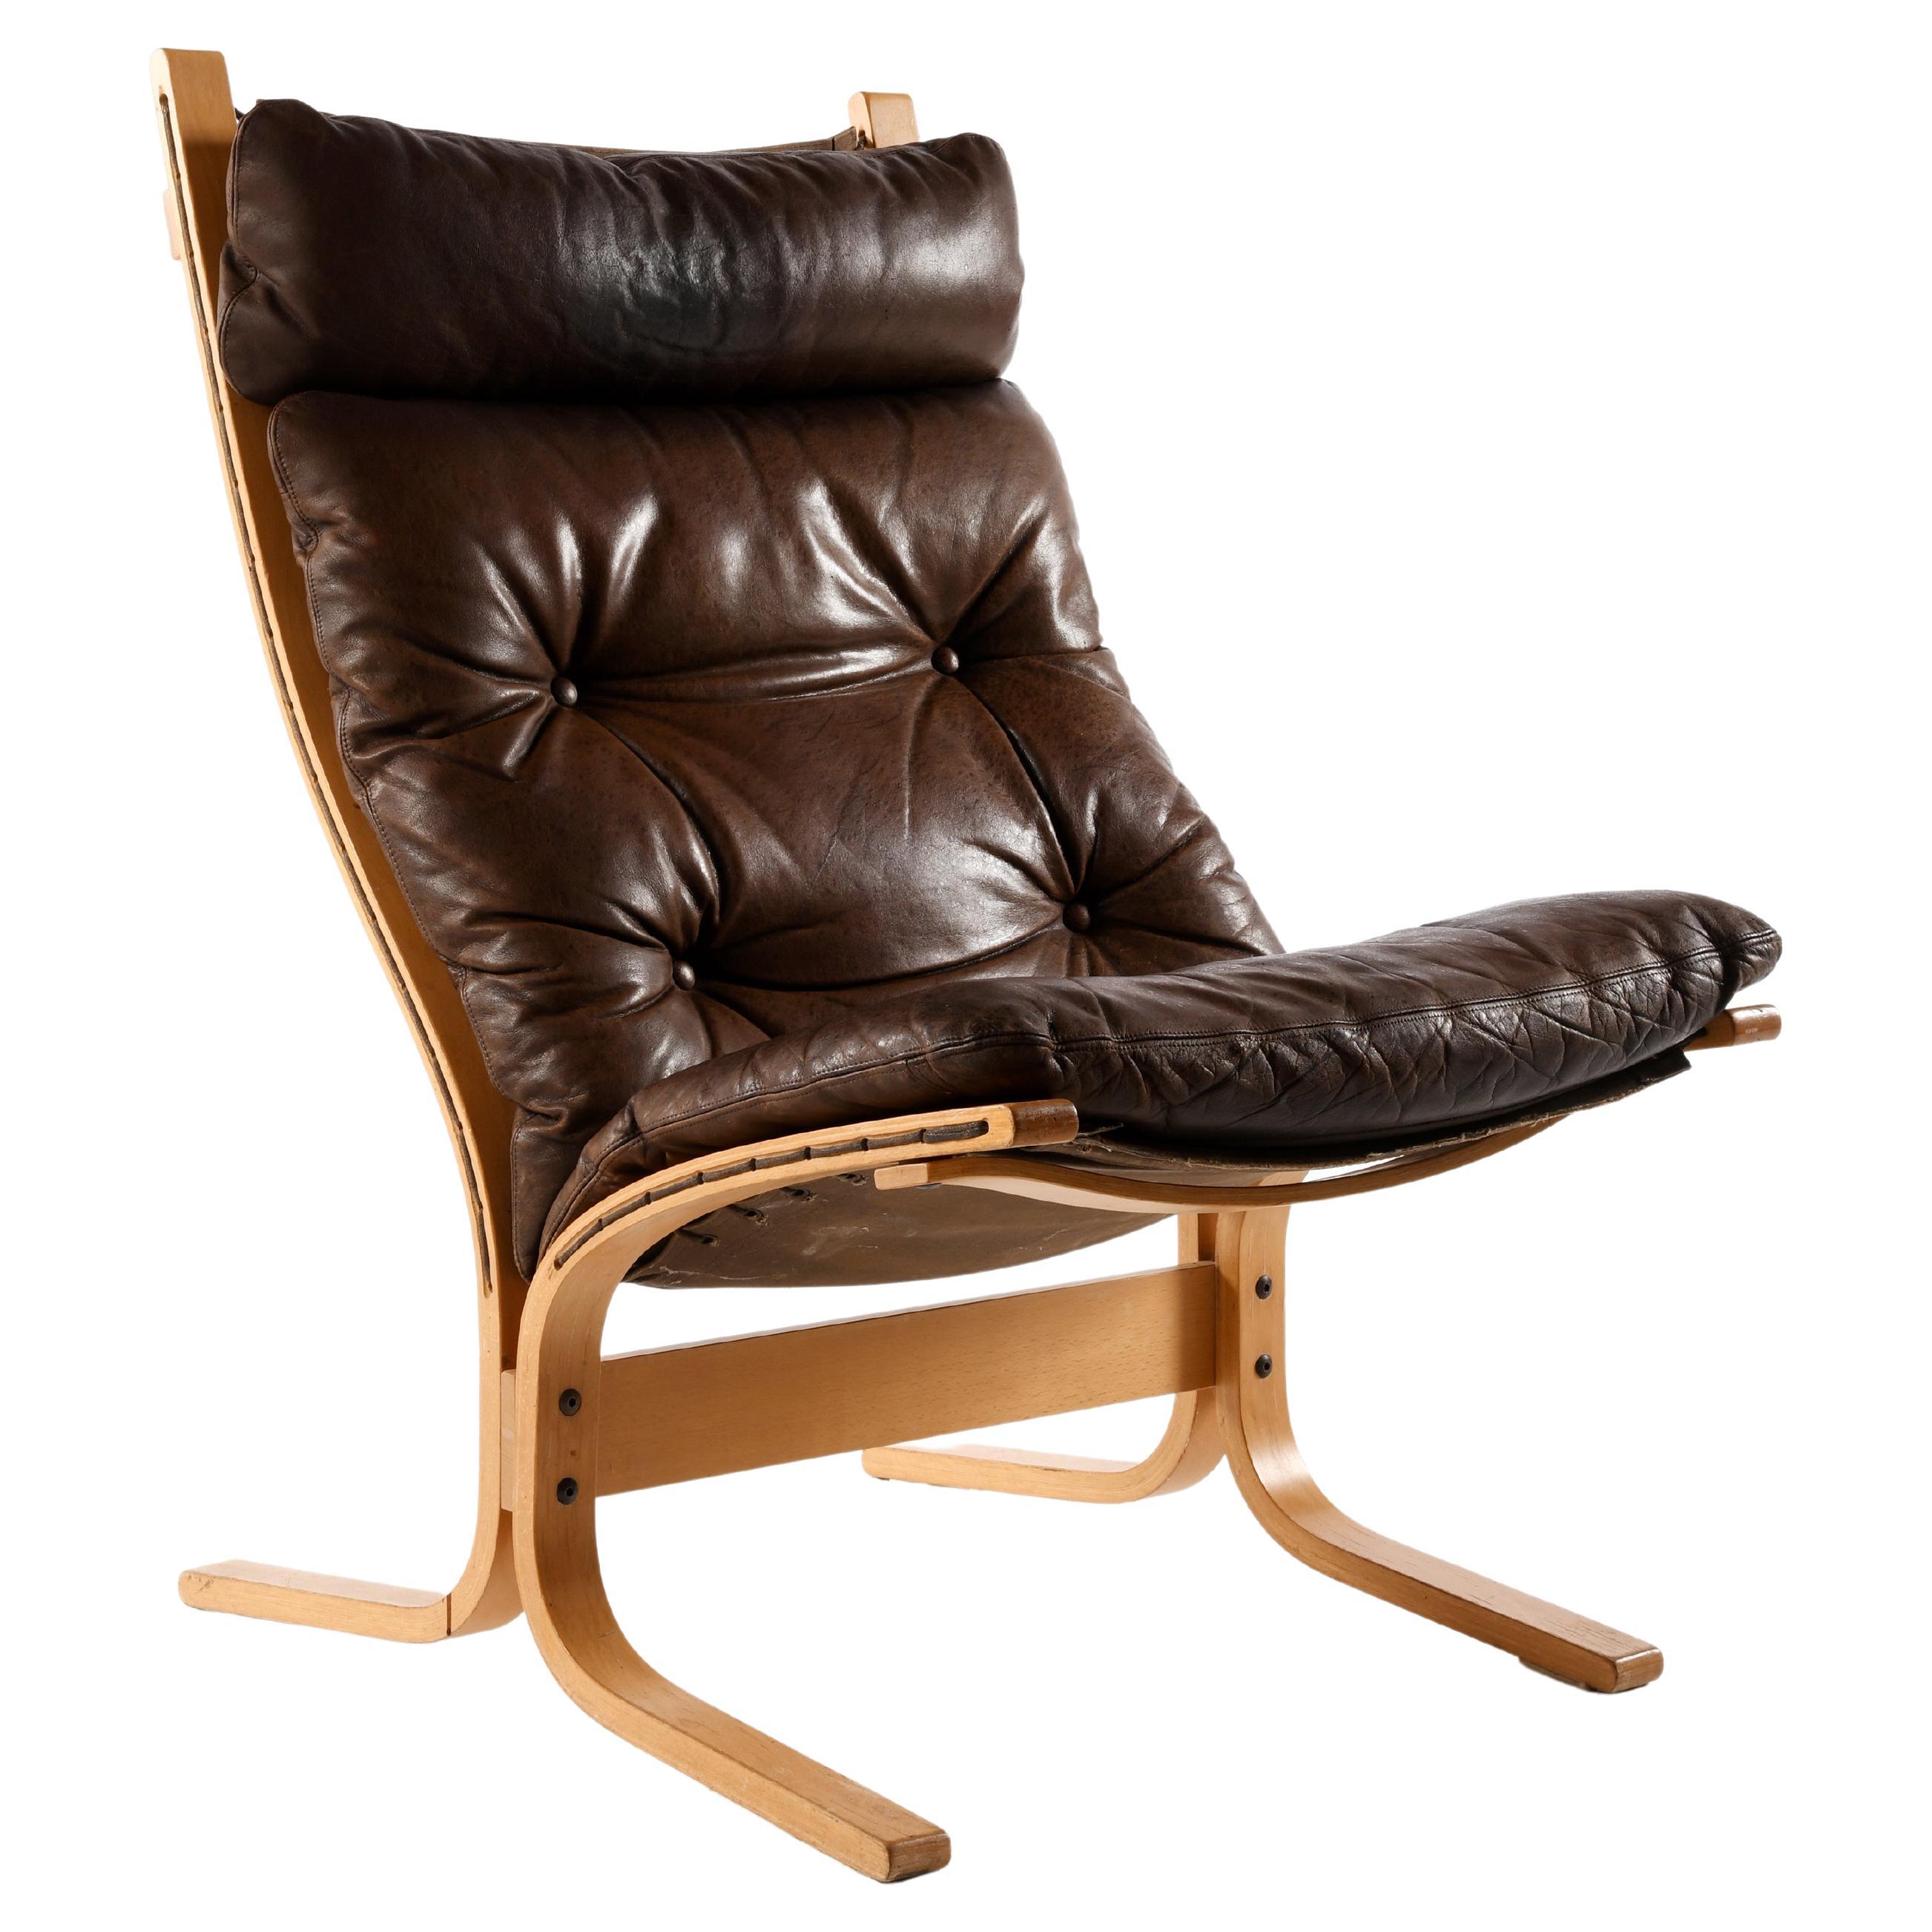 Lounge chair Siesta designed by Ingmar Relling with leather cushion 